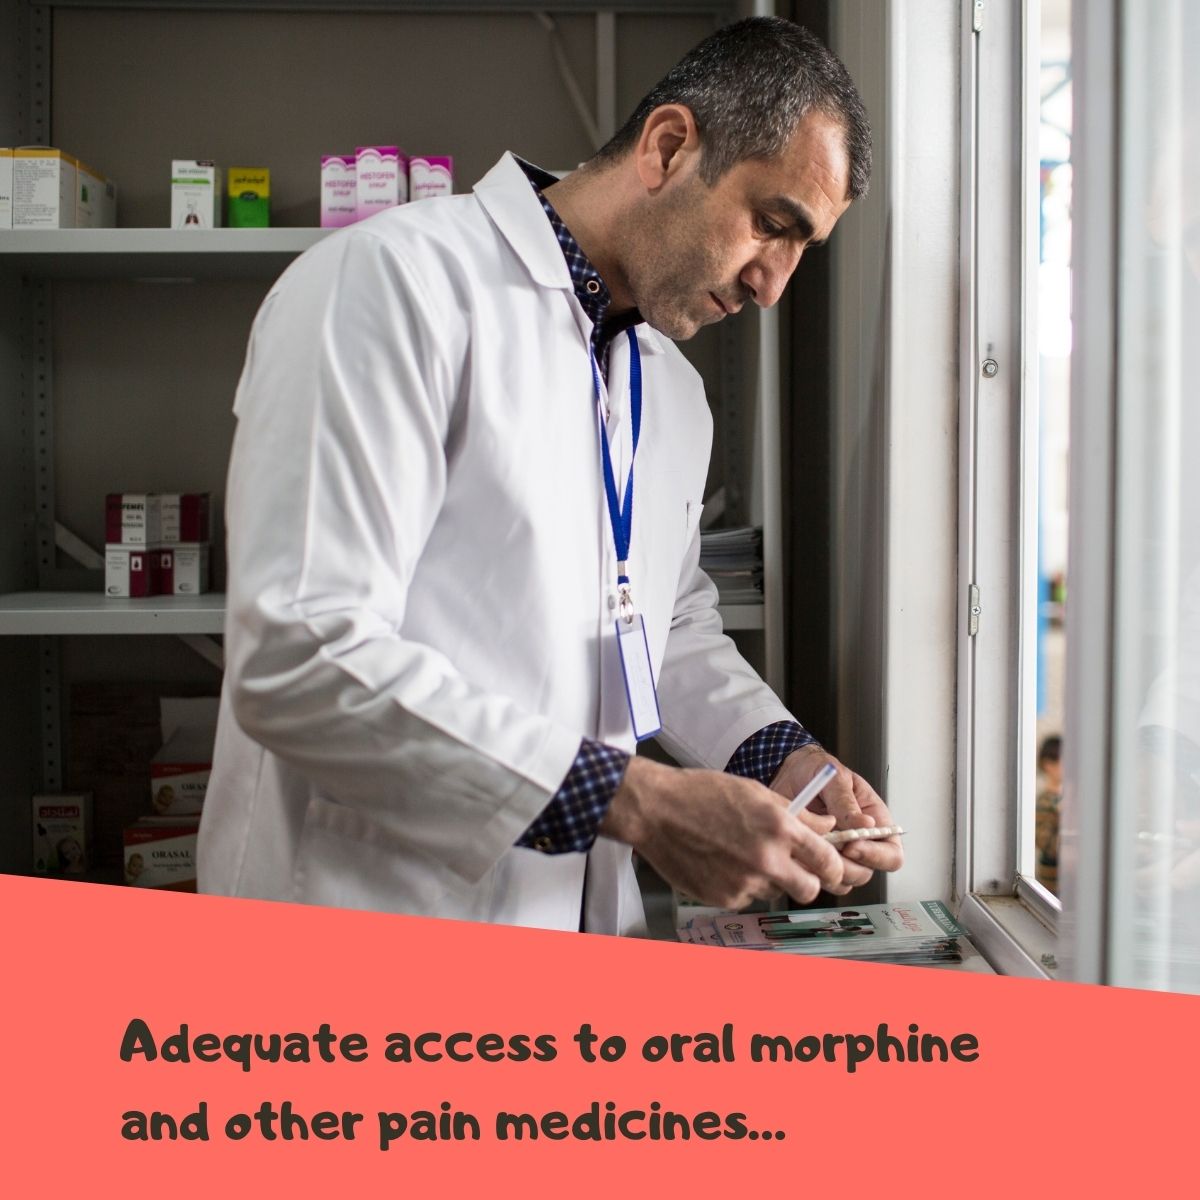 providing_adequate_access_to_pain_medicines_for_the_treatment_of_cancer_pain